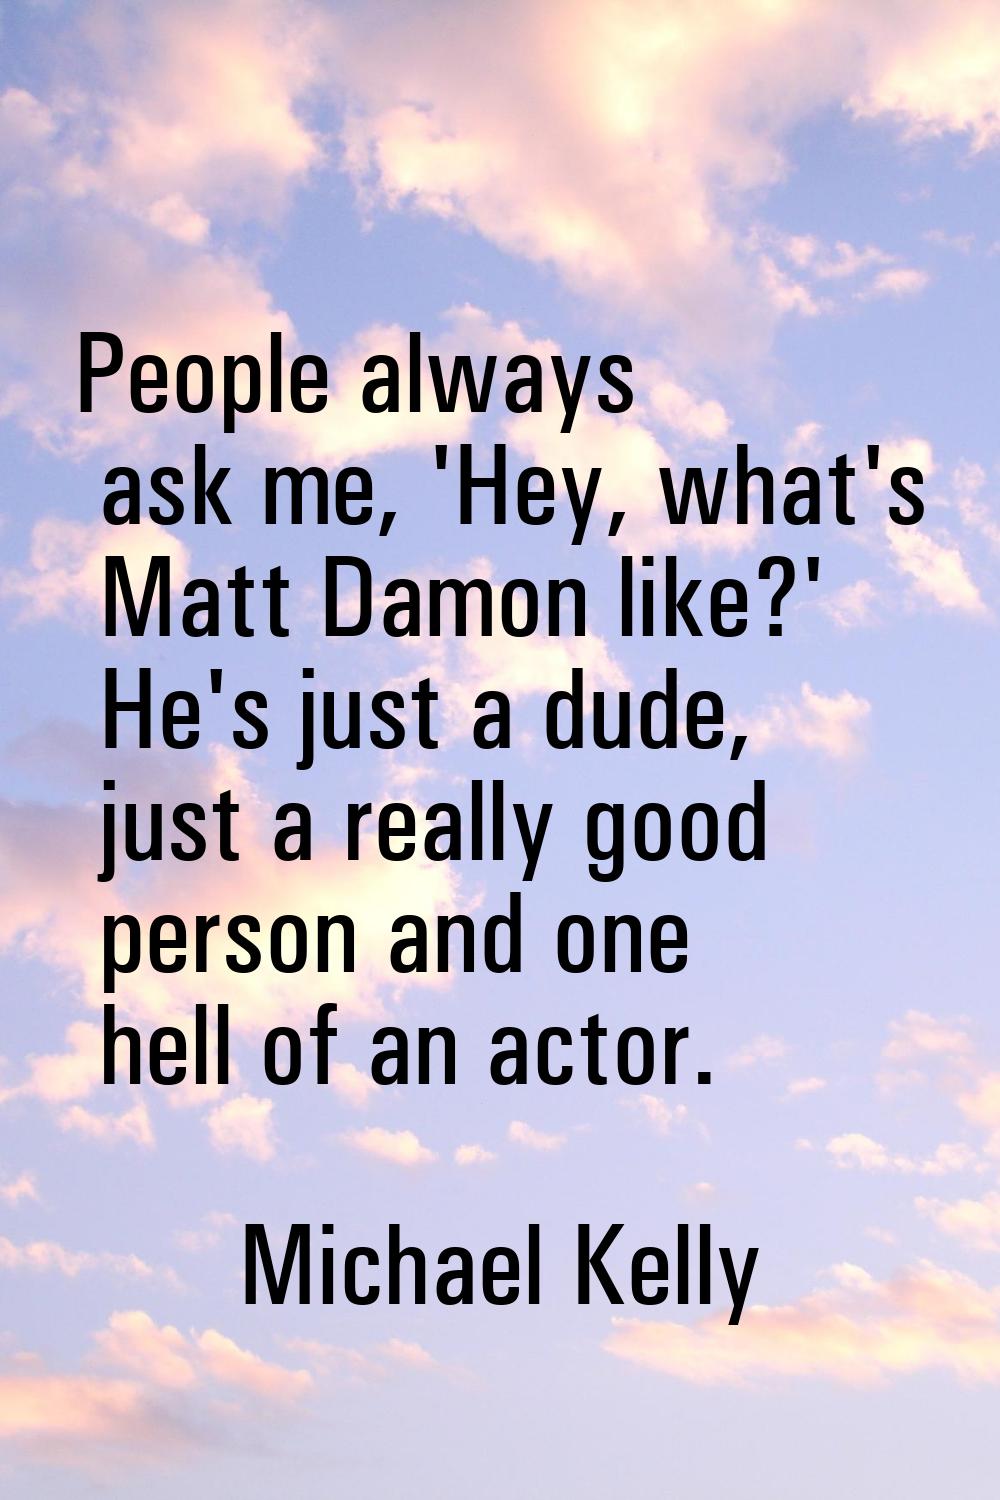 People always ask me, 'Hey, what's Matt Damon like?' He's just a dude, just a really good person an